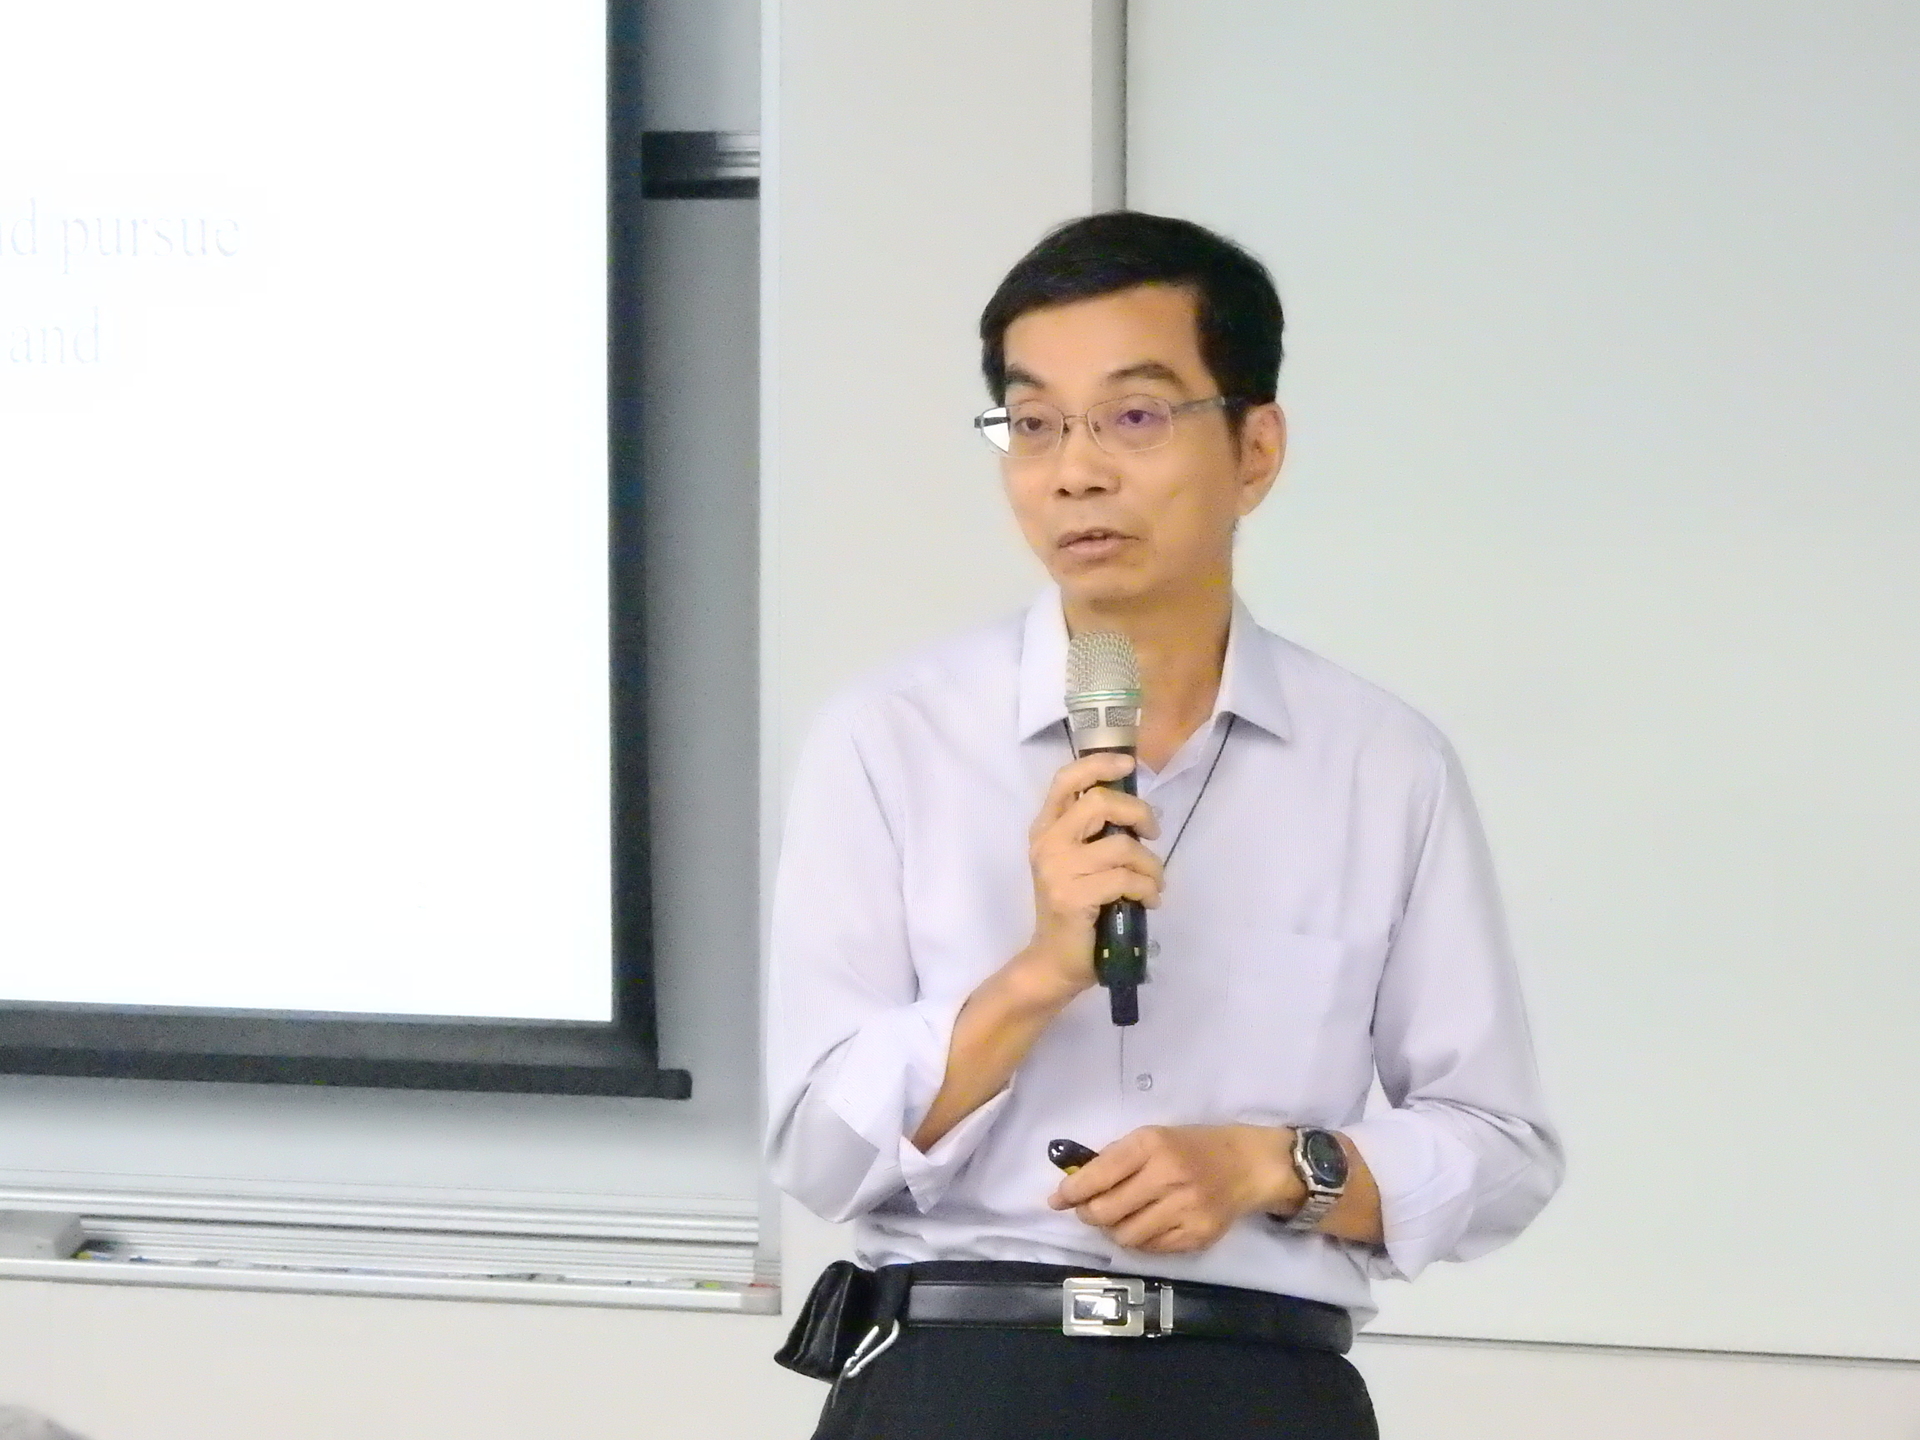 Prof. San-Pui Lam, Director of the Office of Responsibility and Sustainability Actions, presents